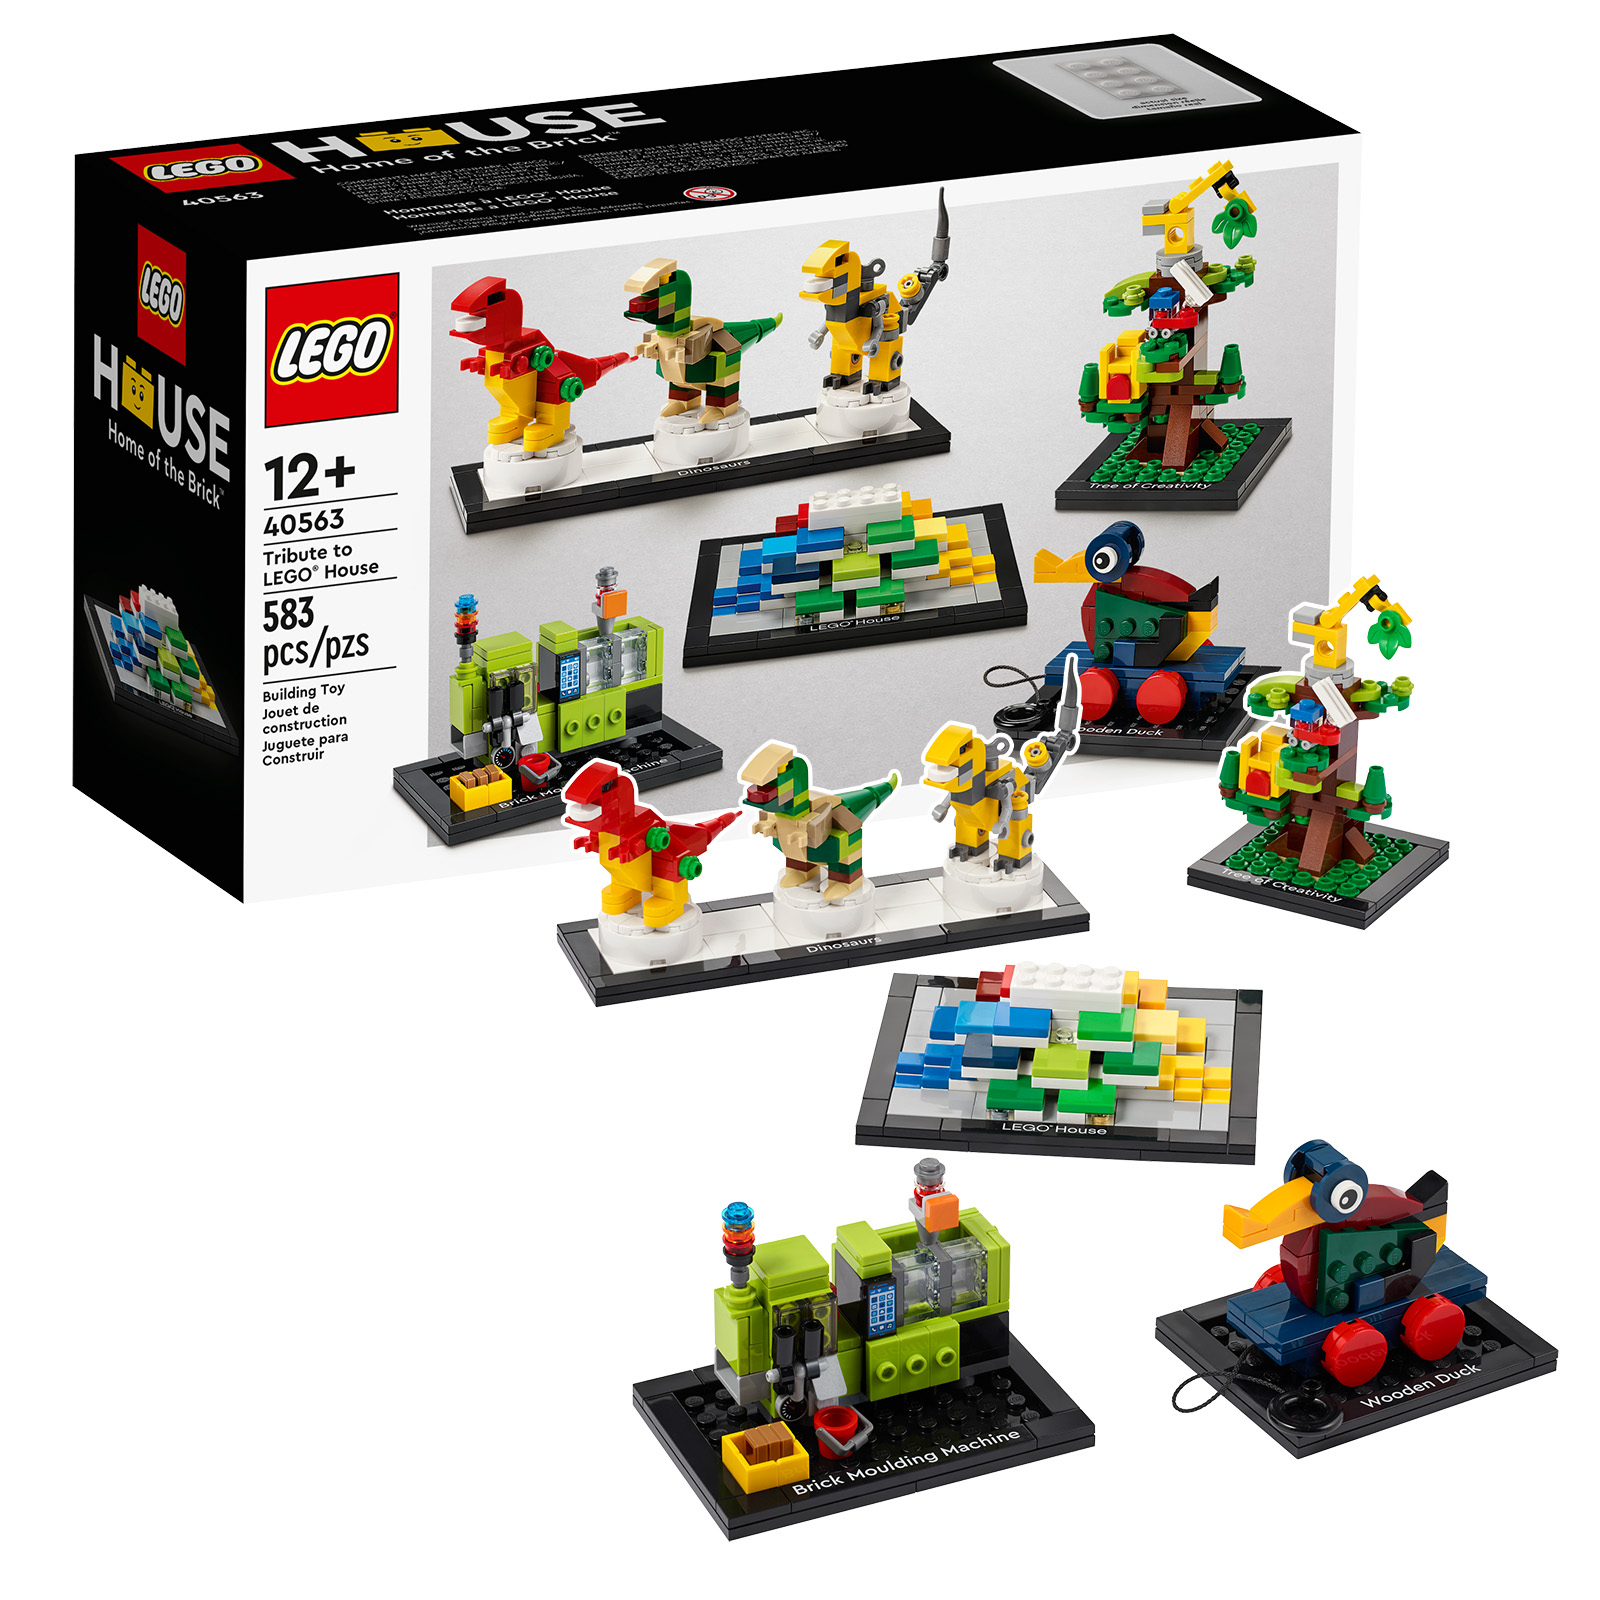 Reminder: last hours to get a copy of the LEGO 40563 Tribute to LEGO House set